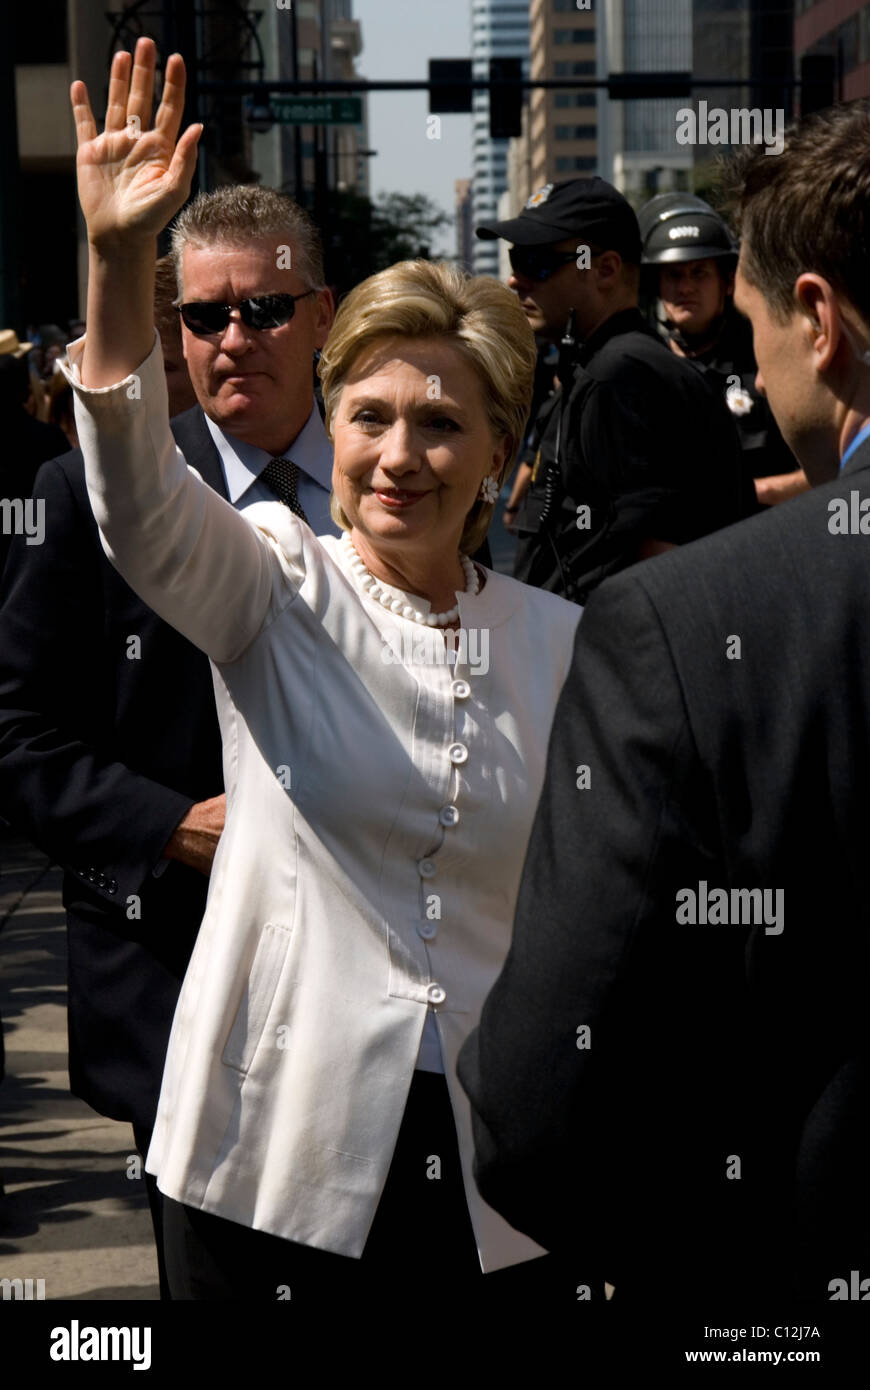 United States Secretary of State Hillary Clinton waving to crowd Stock Photo